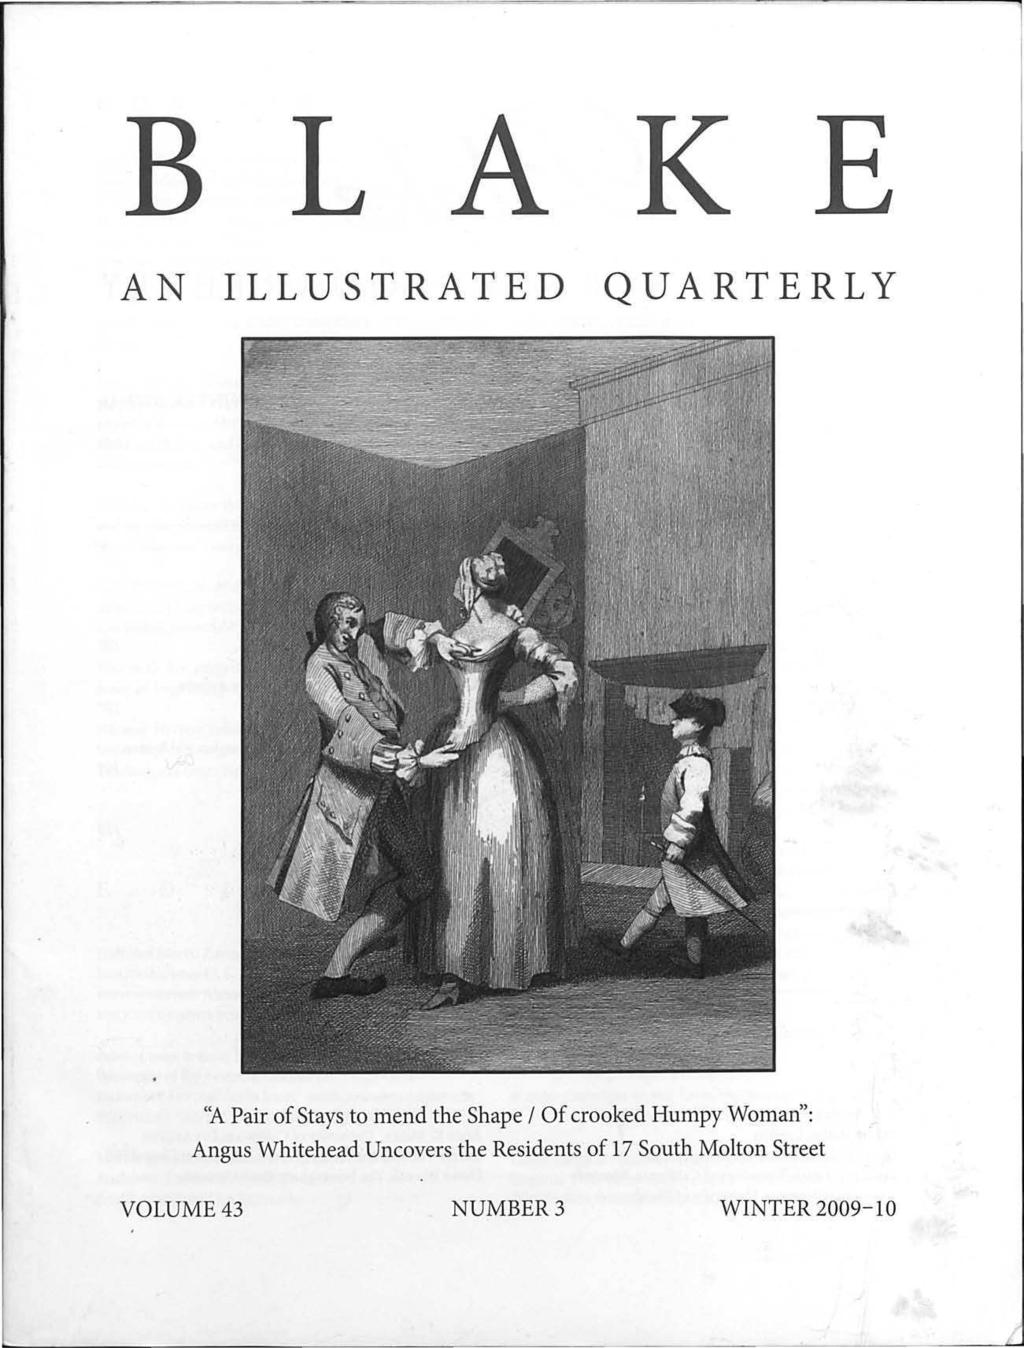 BLAKE AN ILLUSTRATED QUARTERLY "A Pair of Stays to mend the Shape I Of crooked Humpy Woman'':